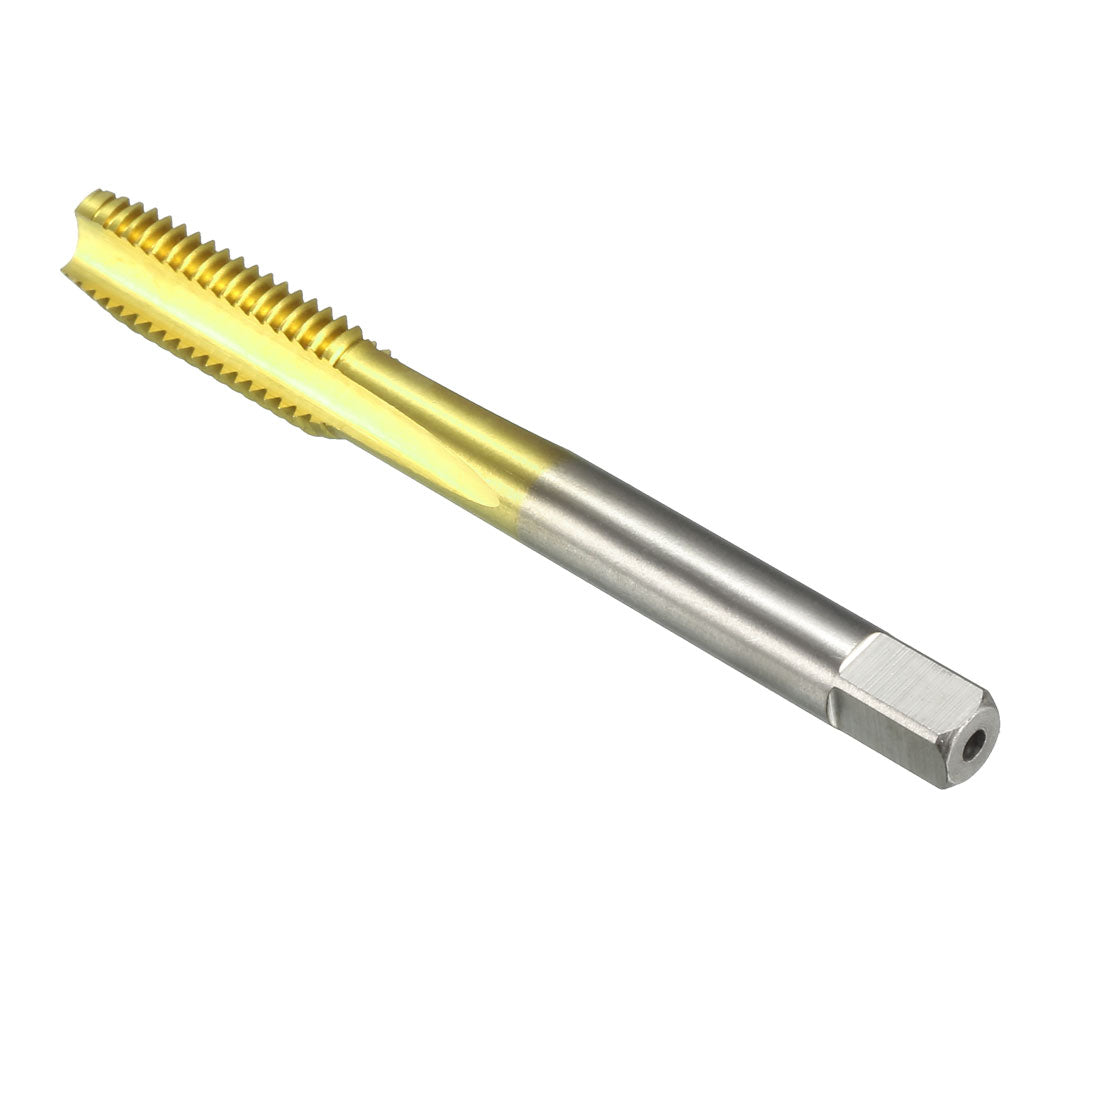 uxcell Uxcell Metric Tap M8 x 1.25 H2 Right Hand Thread Plug Ti-coated for Threading Tapping